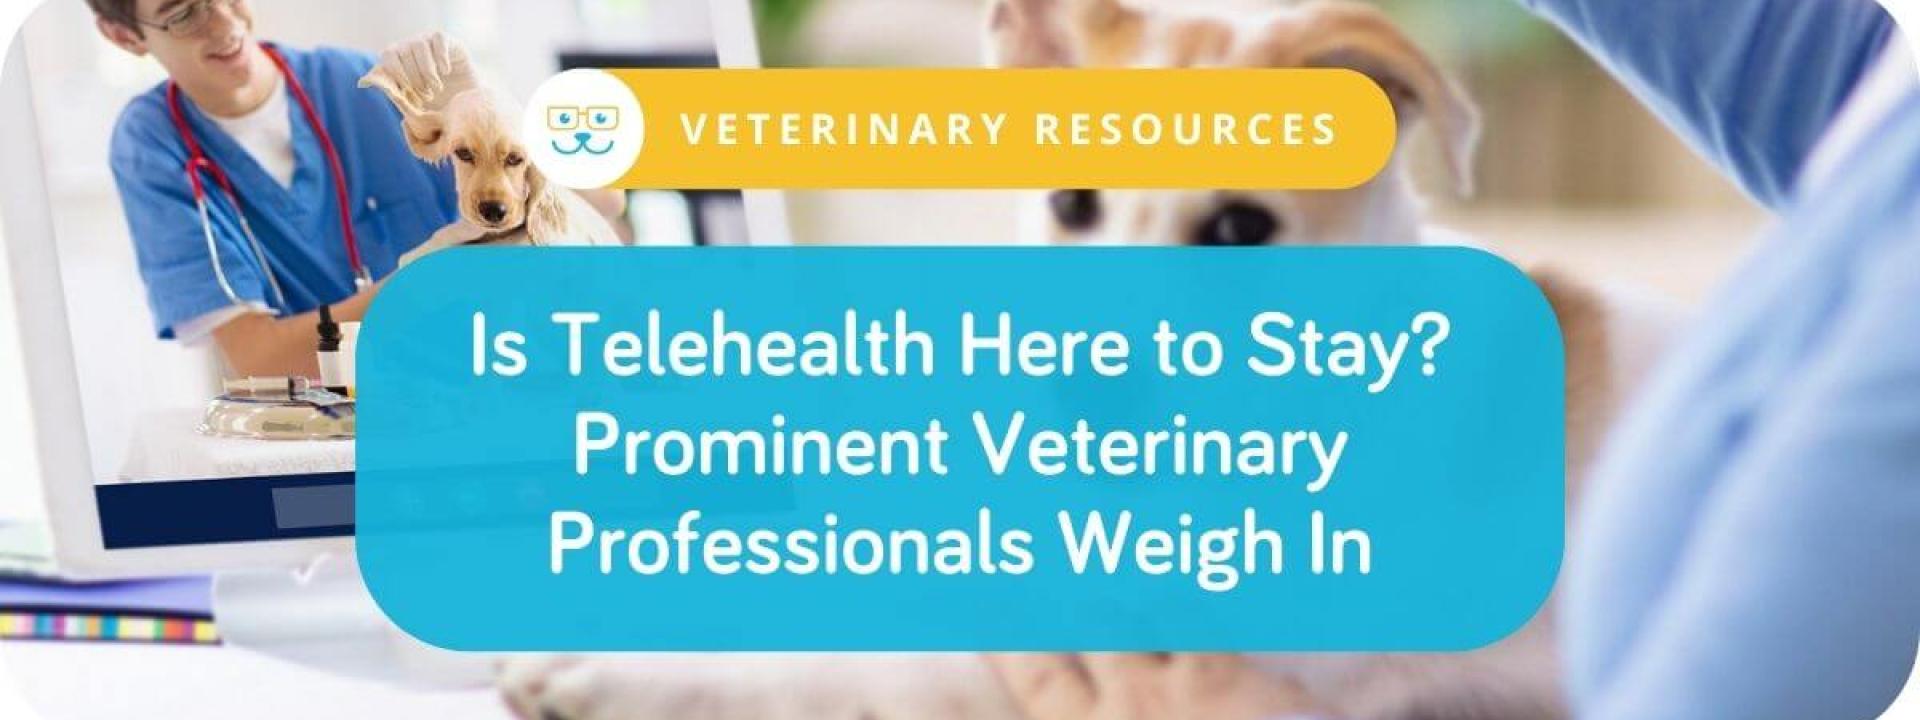 Is Telehealth Here to Stay? Prominent Veterinary Professionals Weigh In